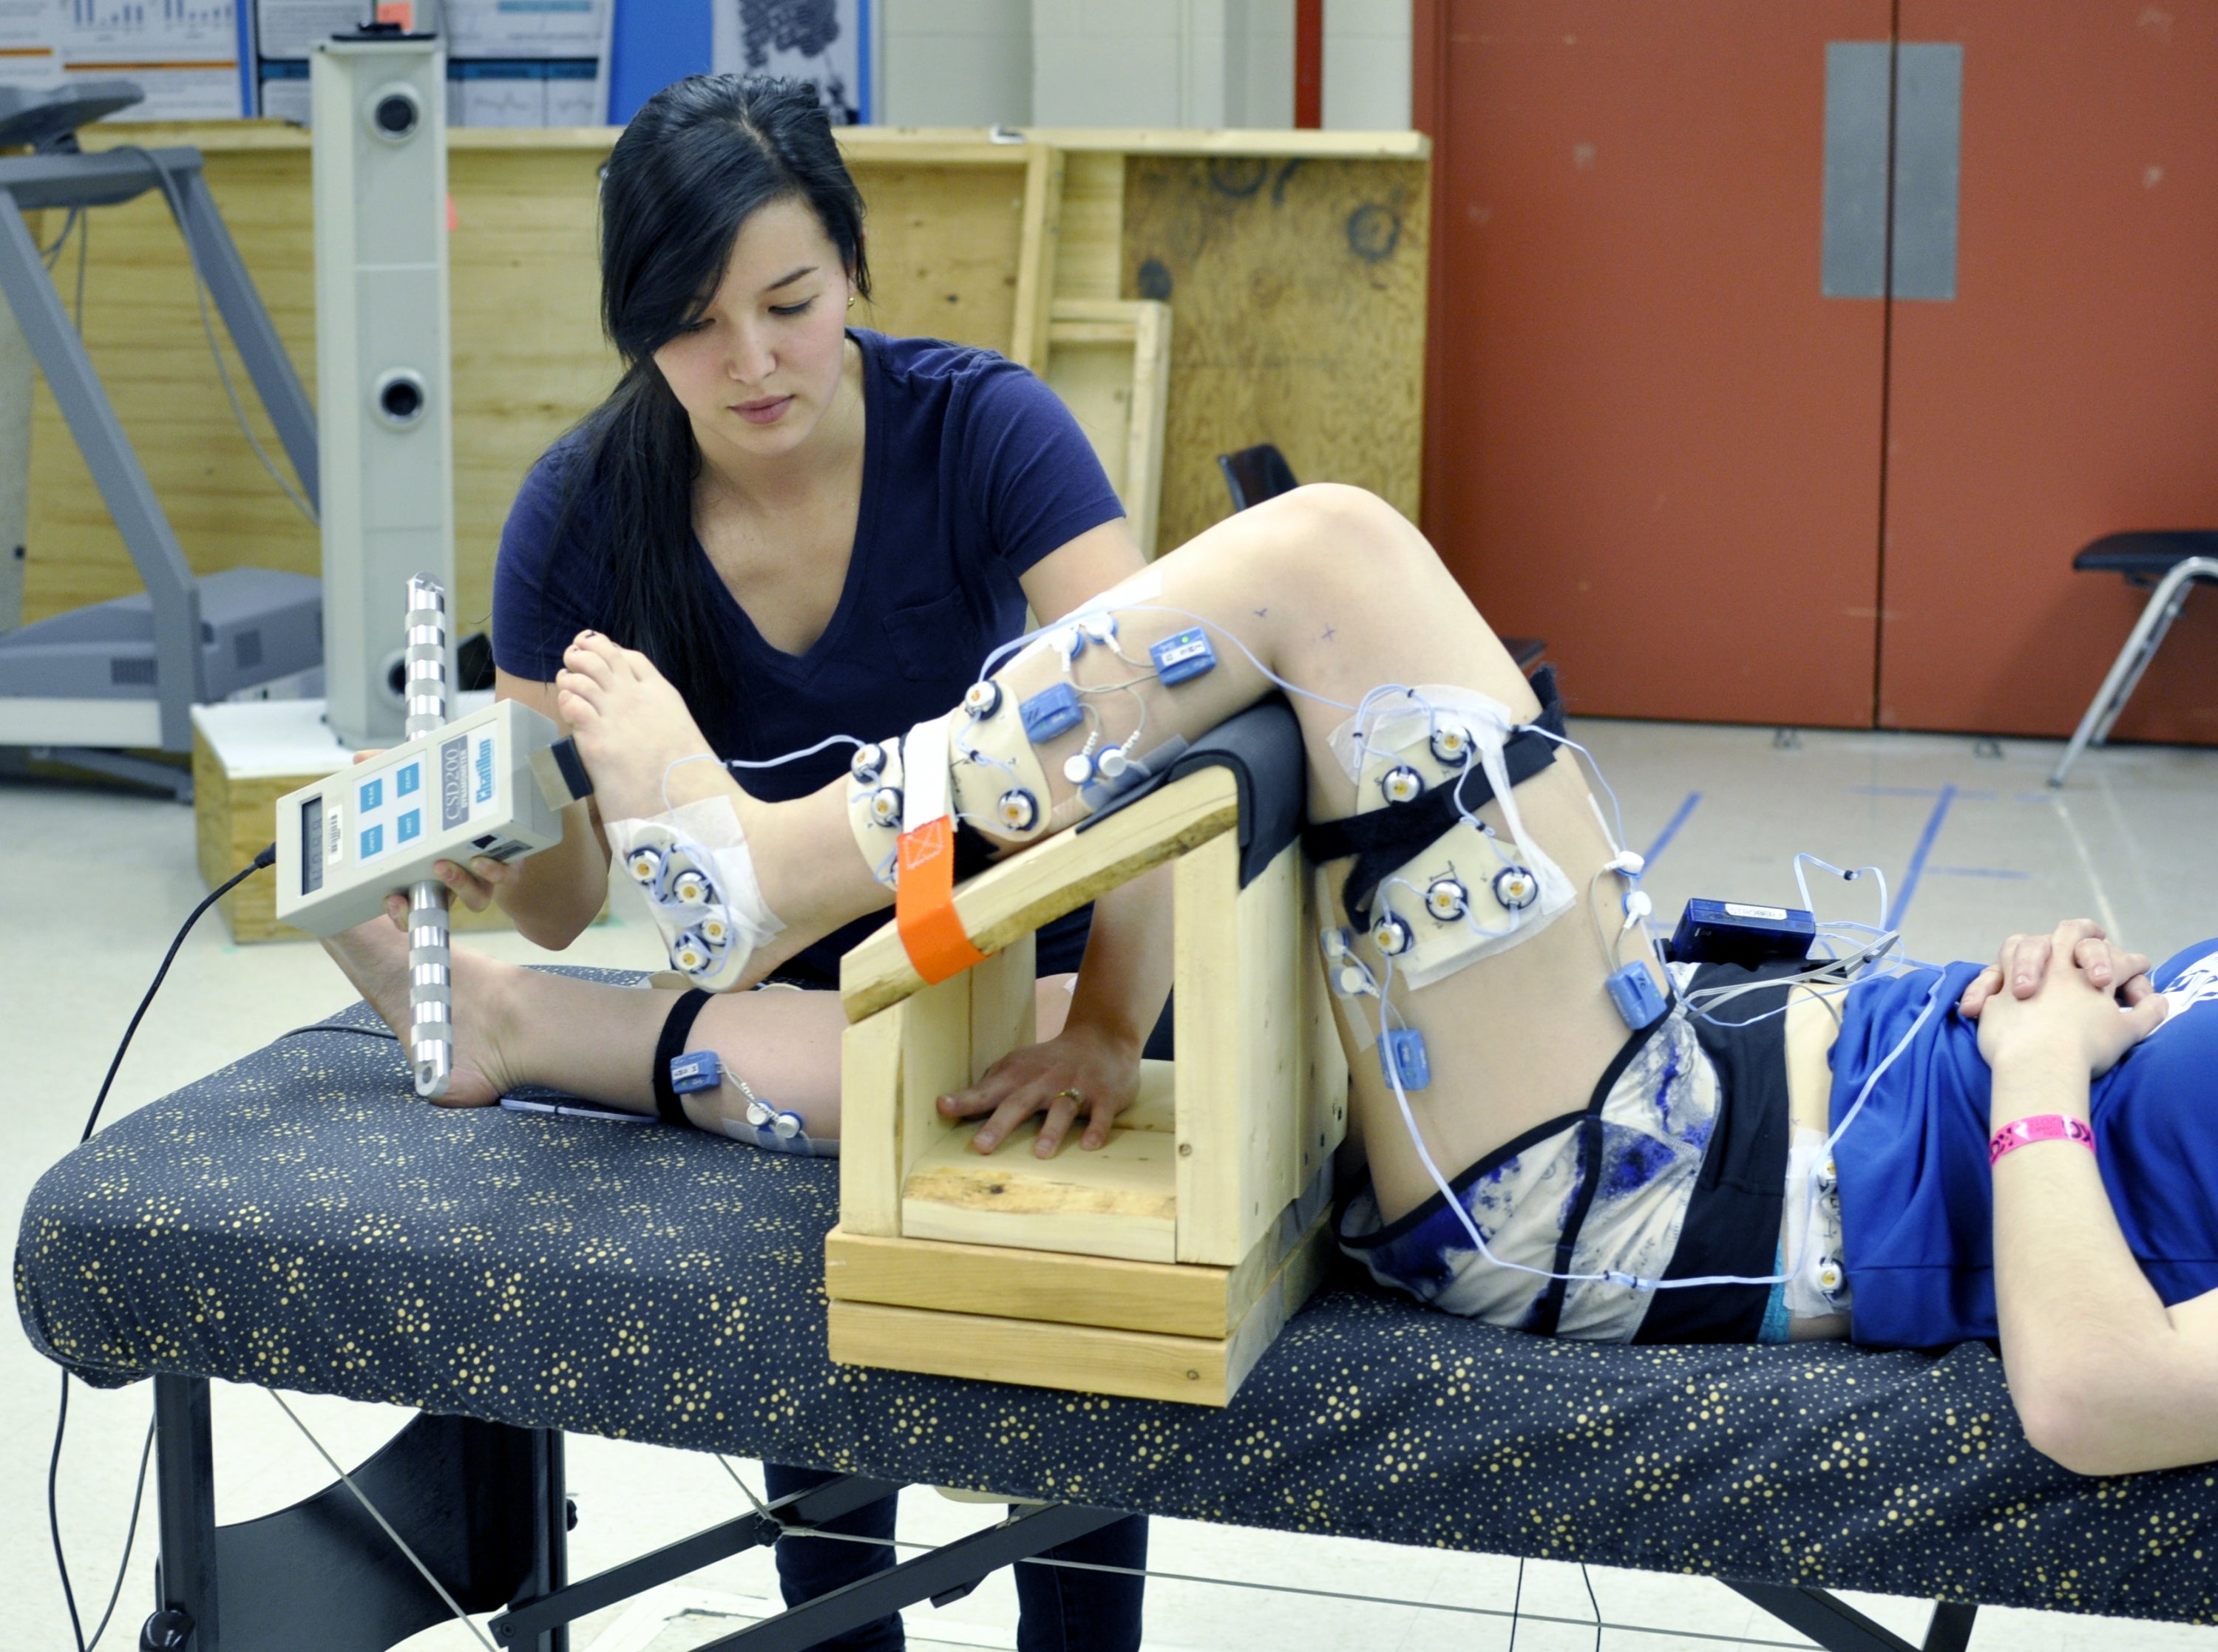 Participant's leg supported by a 90 degree jig and researcher pushing foot up 